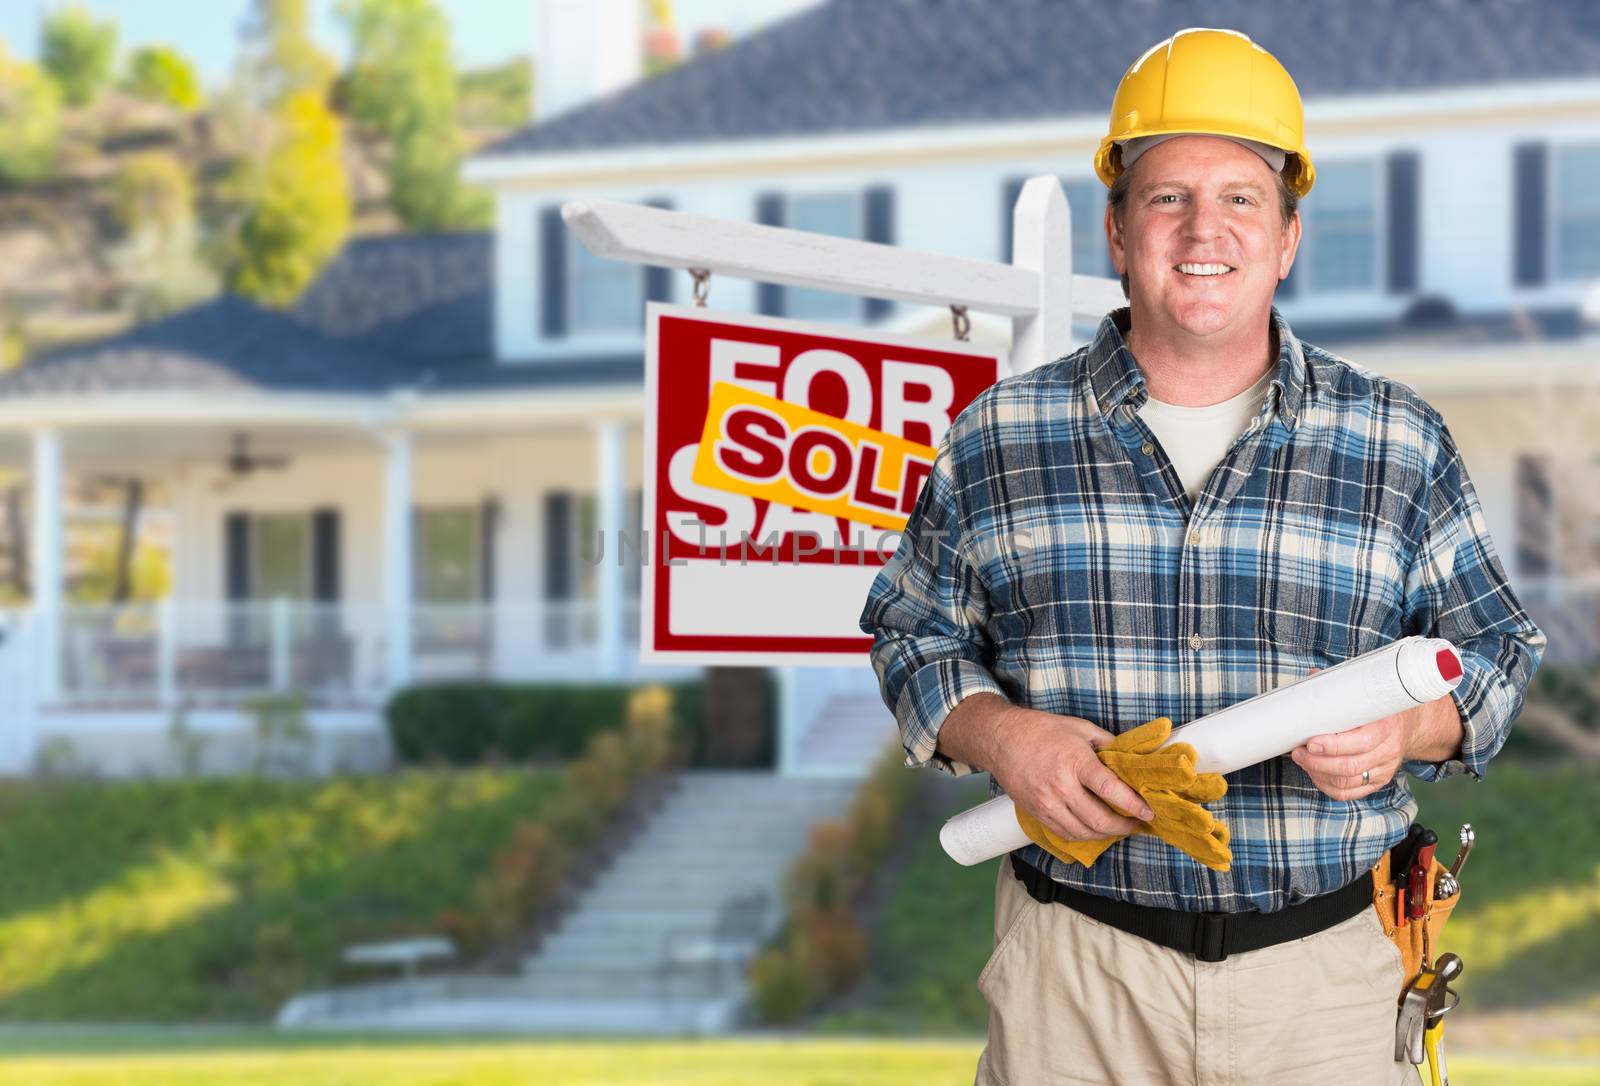 Contractor With Plans and Hard Hat In Front of Sold For Sale Real Estate Sign and House. by Feverpitched